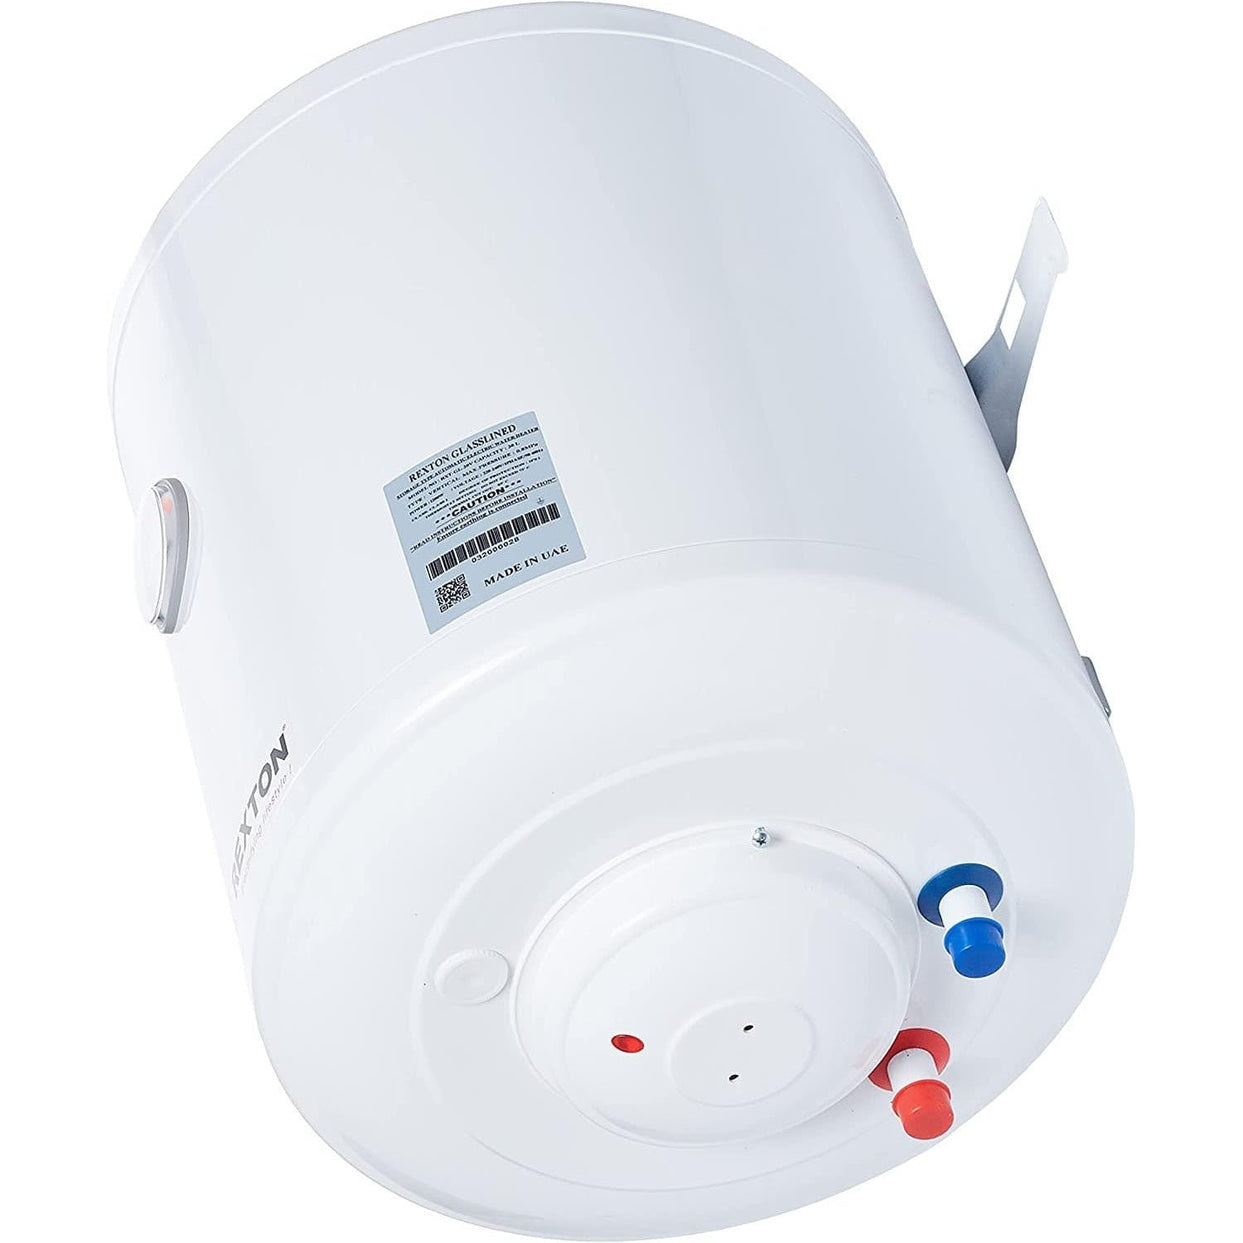 Rexton Vertical Water Heater White, 30L - RXT-GL-30V | Supply Master | Accra, Ghana Water Heater Buy Tools hardware Building materials